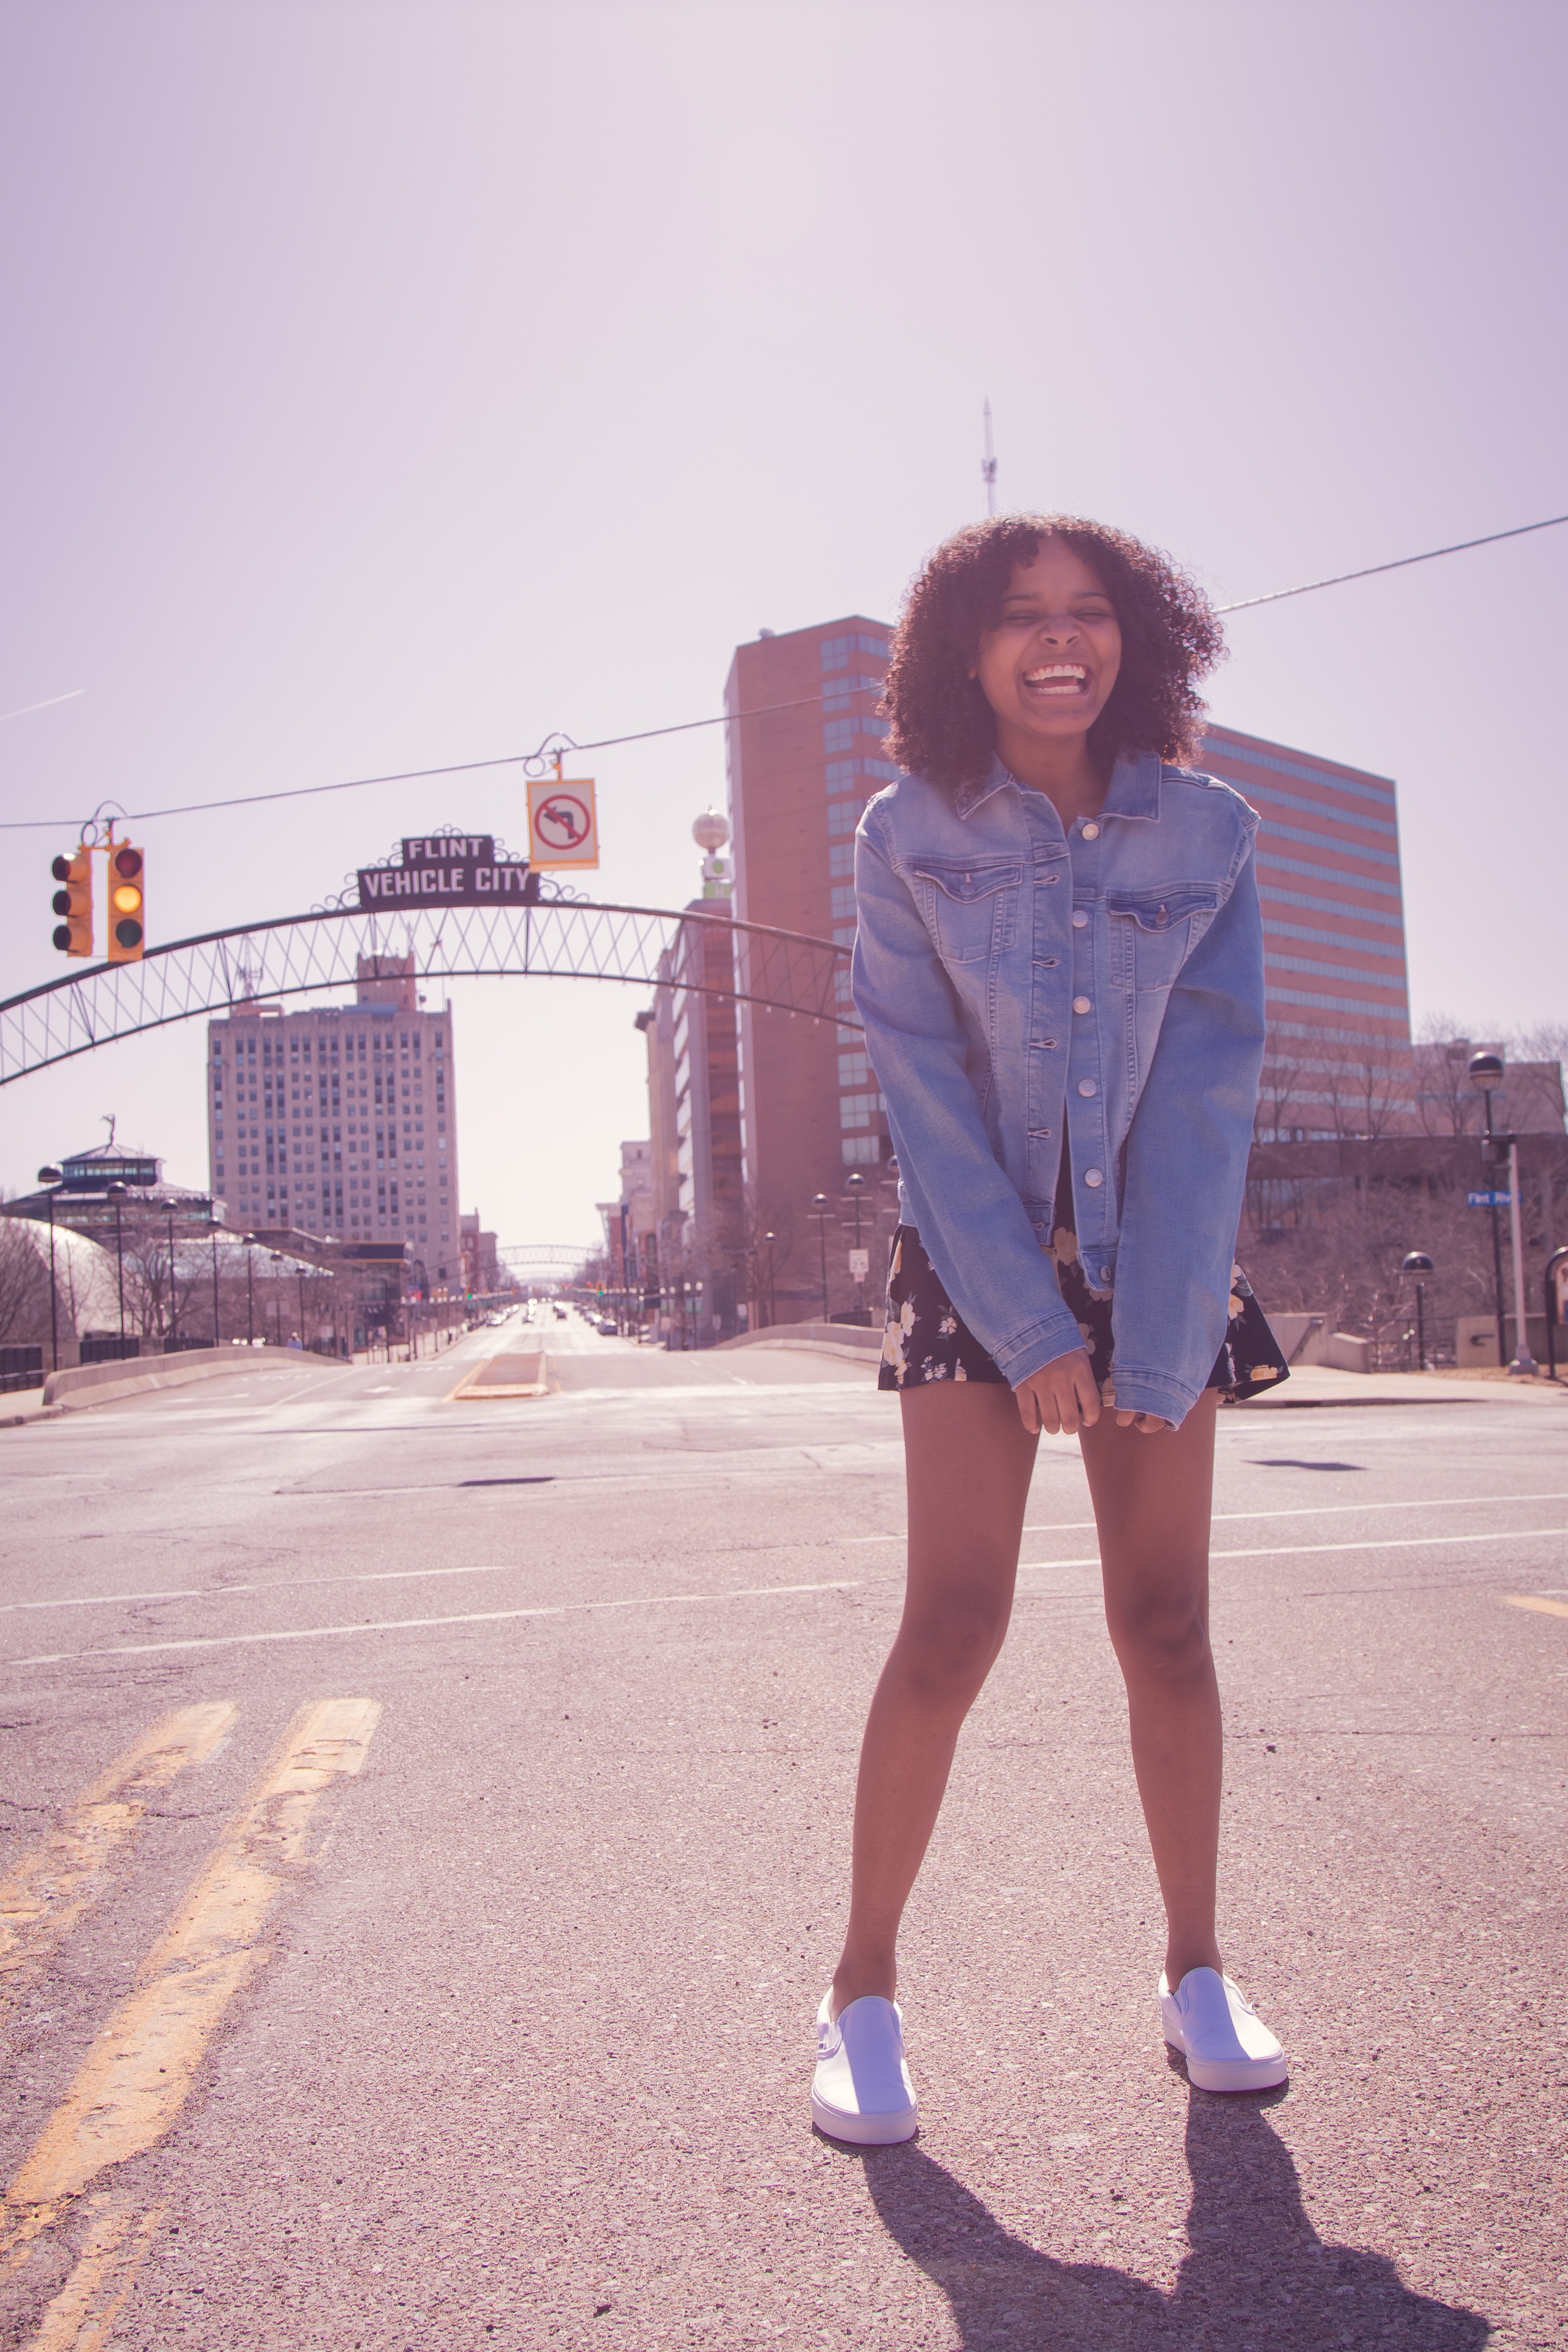 Mari Copeny on X: Little Miss Flint and Hot Wing the